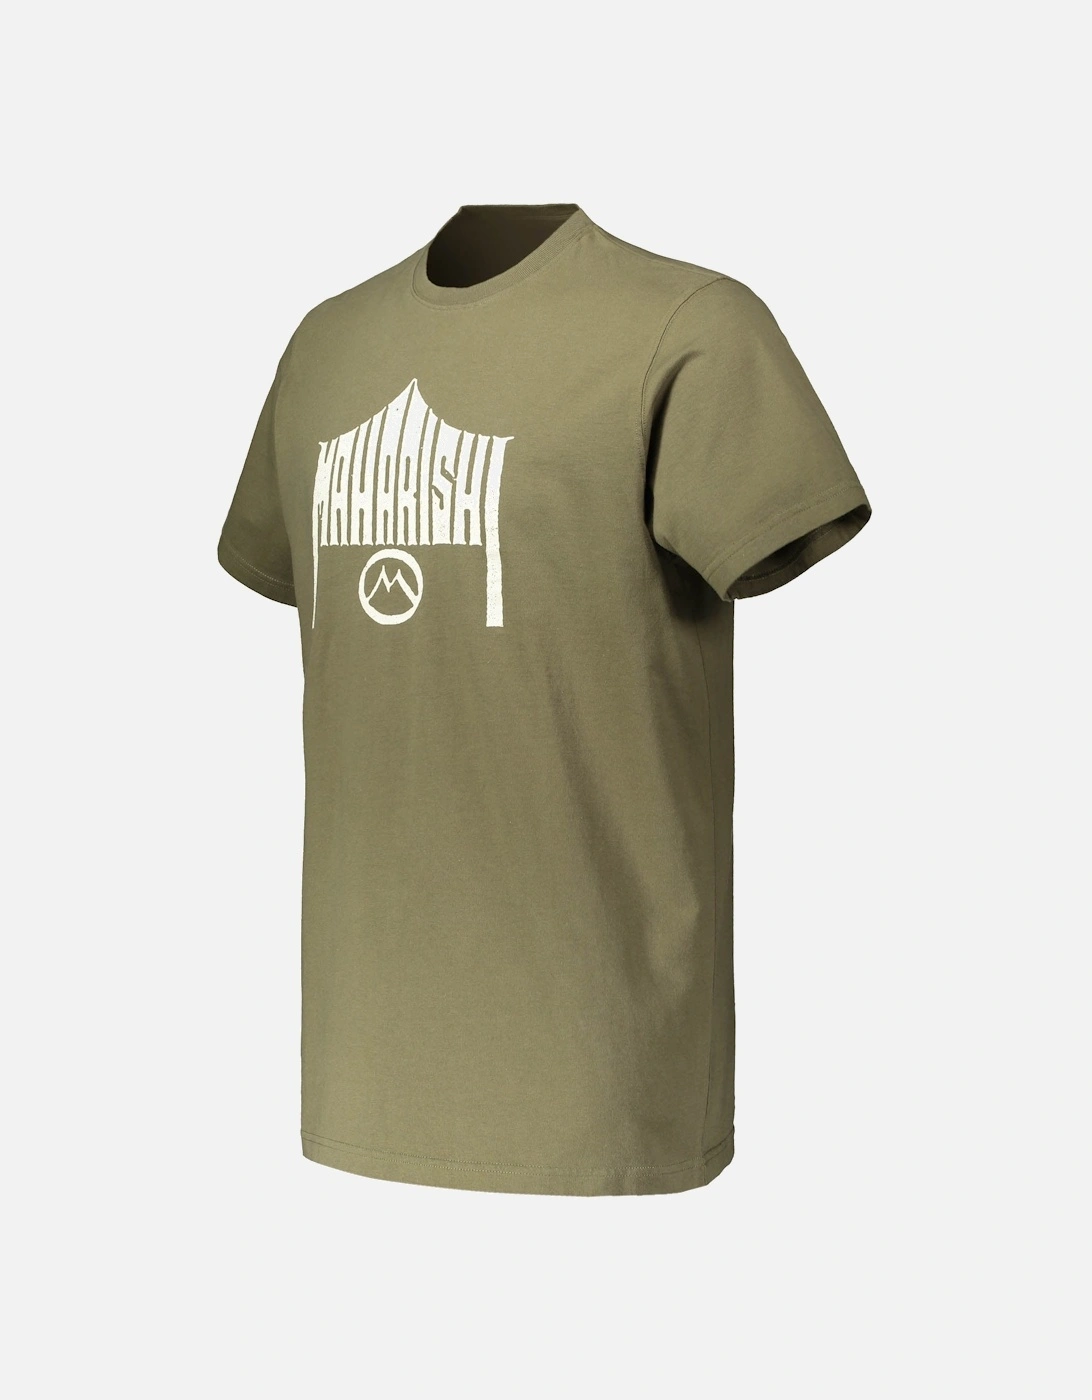 Temple Kay-One Print T-Shirt - Olive